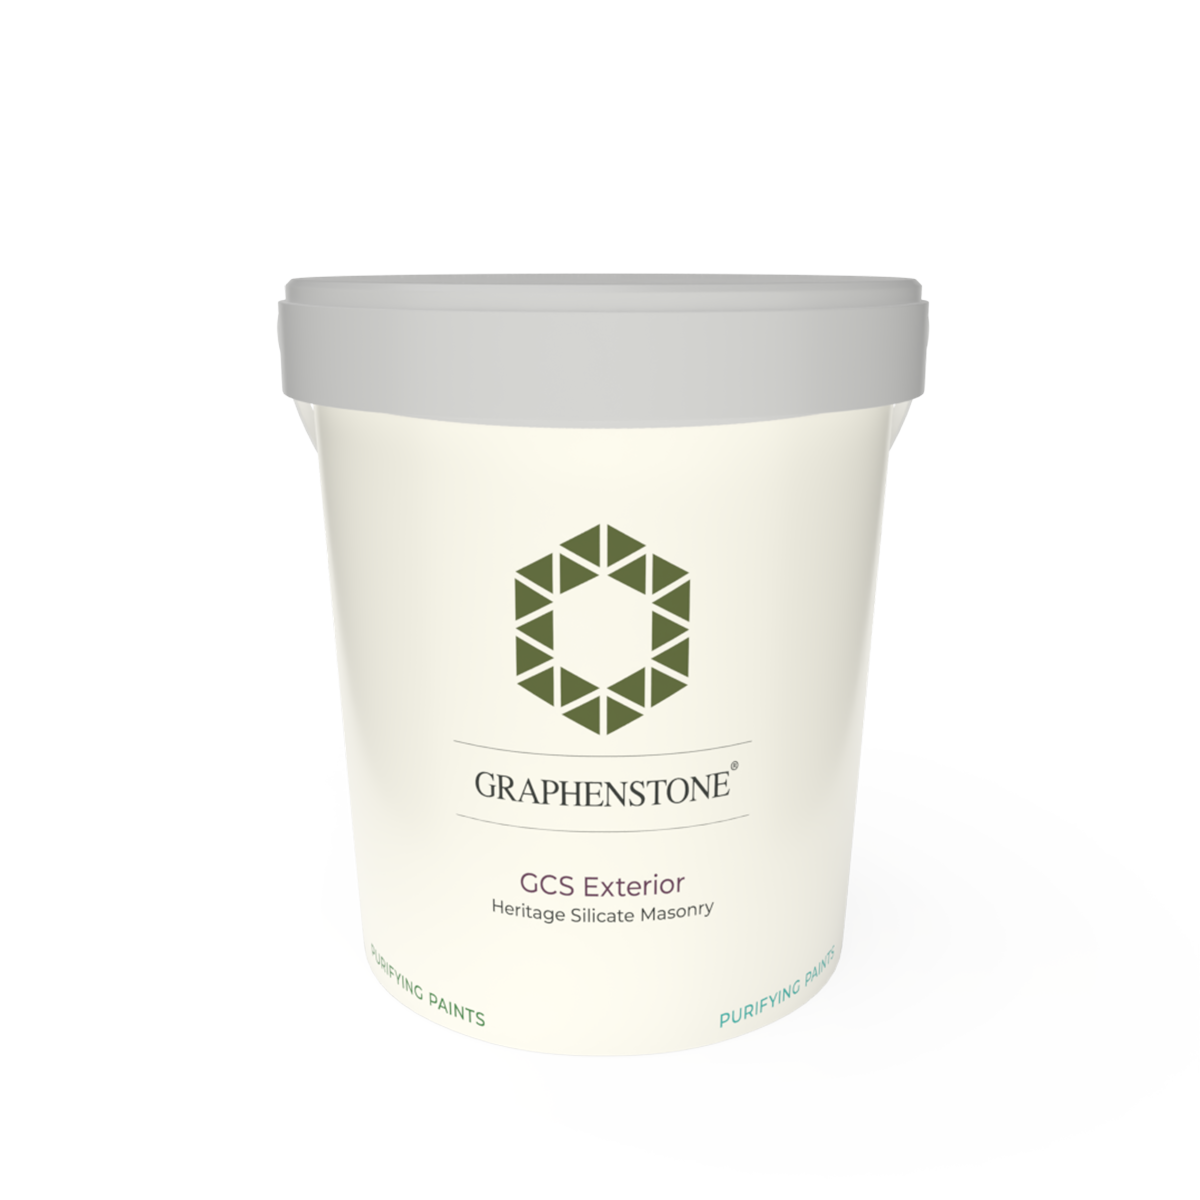 GCS Exterior White – Our classic, breathable matt masonry paint for heritage / listed properties, Ultra Matt finish for Lime renders and exterior masonry